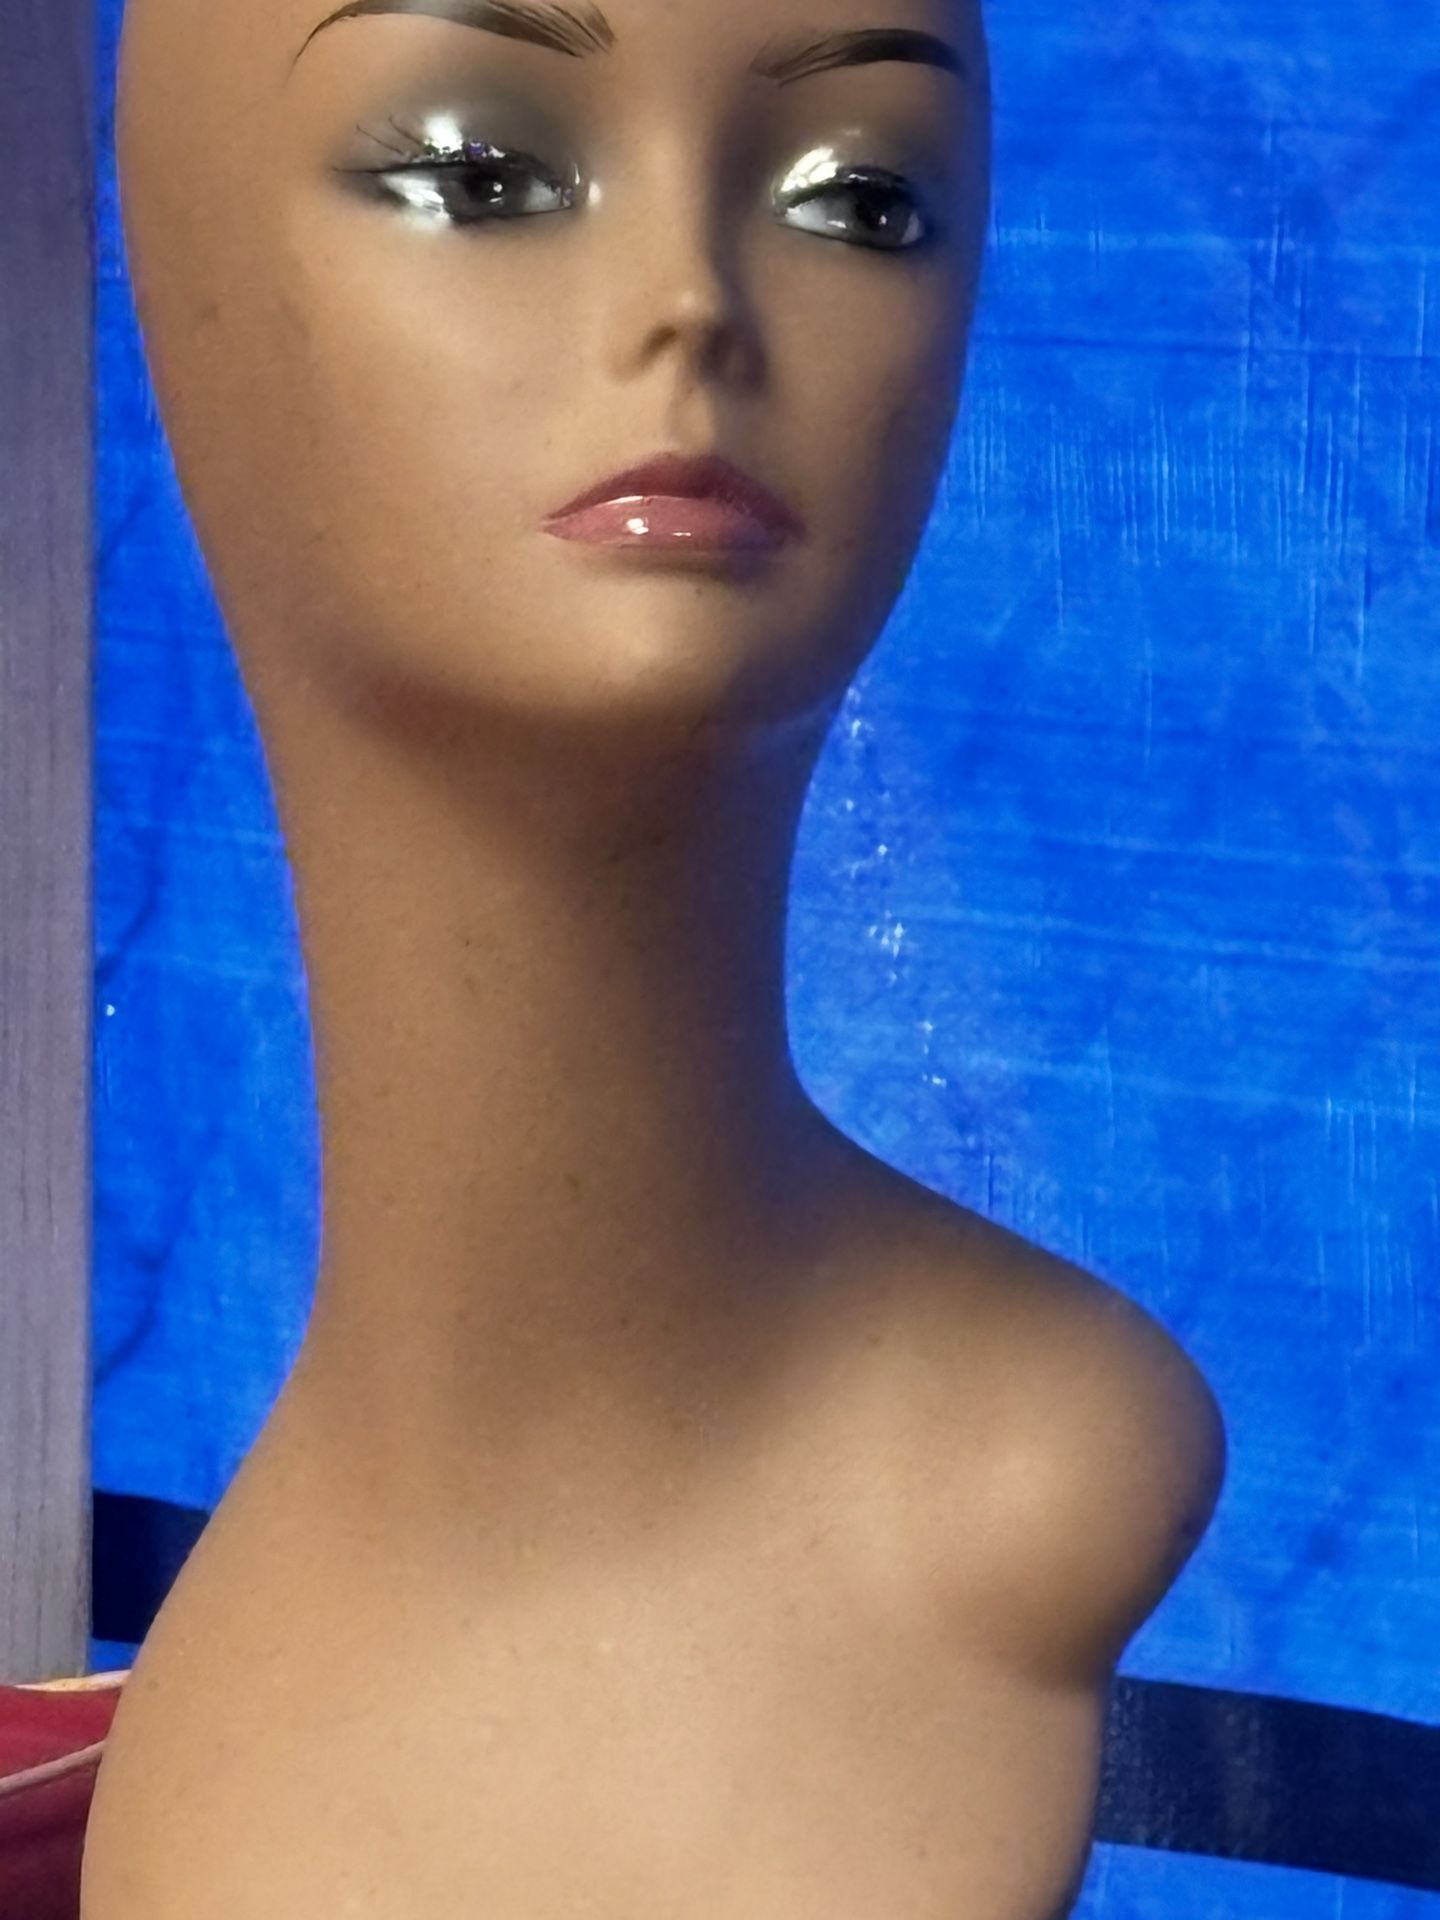 Mannequin HEAD FOR WIGS( Wig Influencer) 